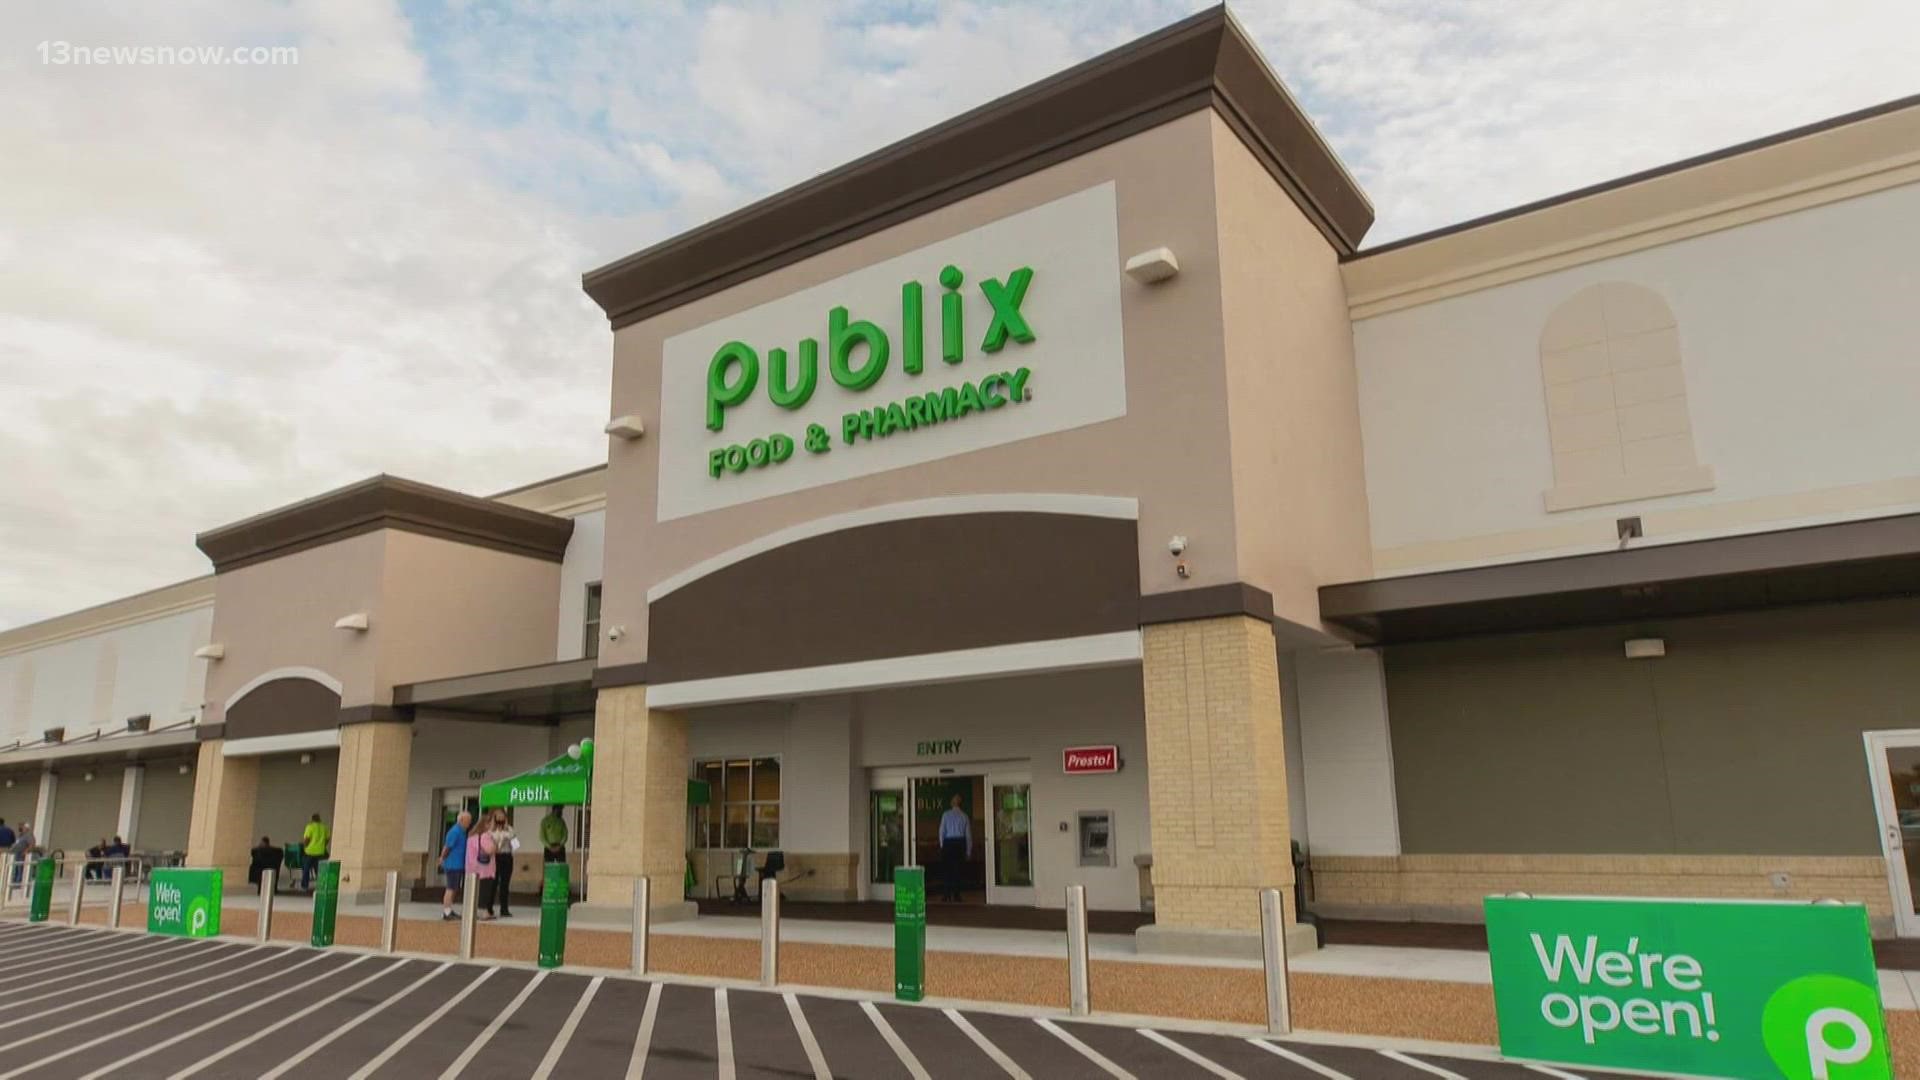 "We are pleased to announce that Publix Super Markets has executed a lease on a new store location in Suffolk, VA," a Publix spokesperson said.